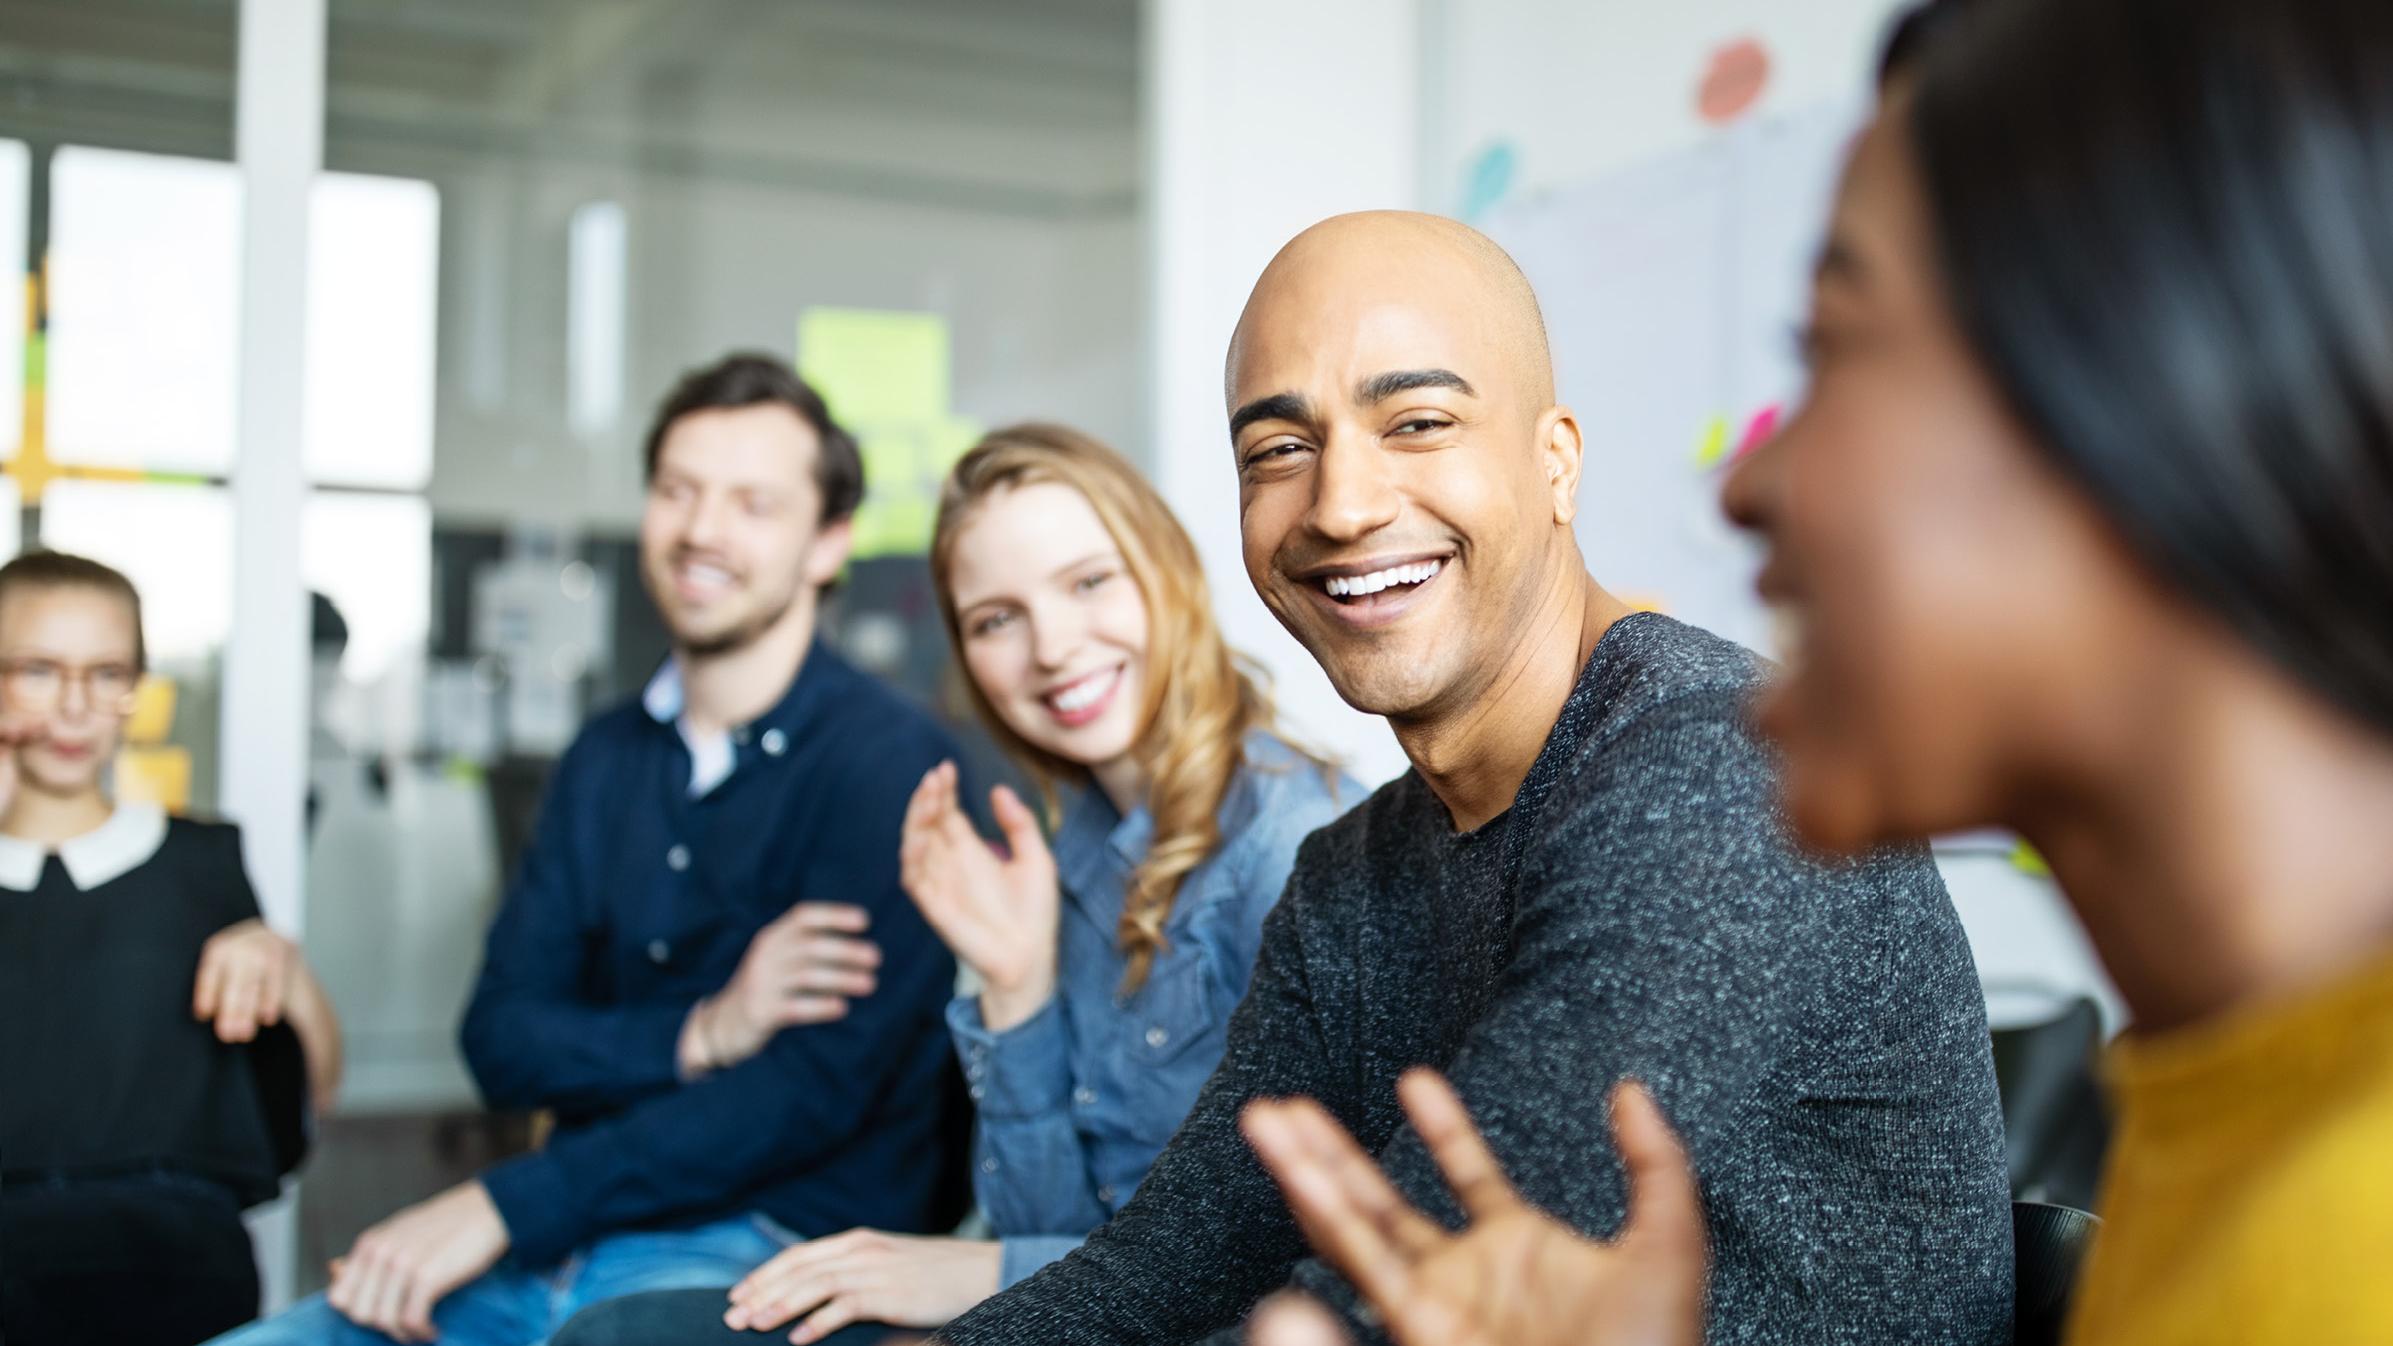 Group of men and women of all ethnicities, sitting in an office setting laughing and conversing